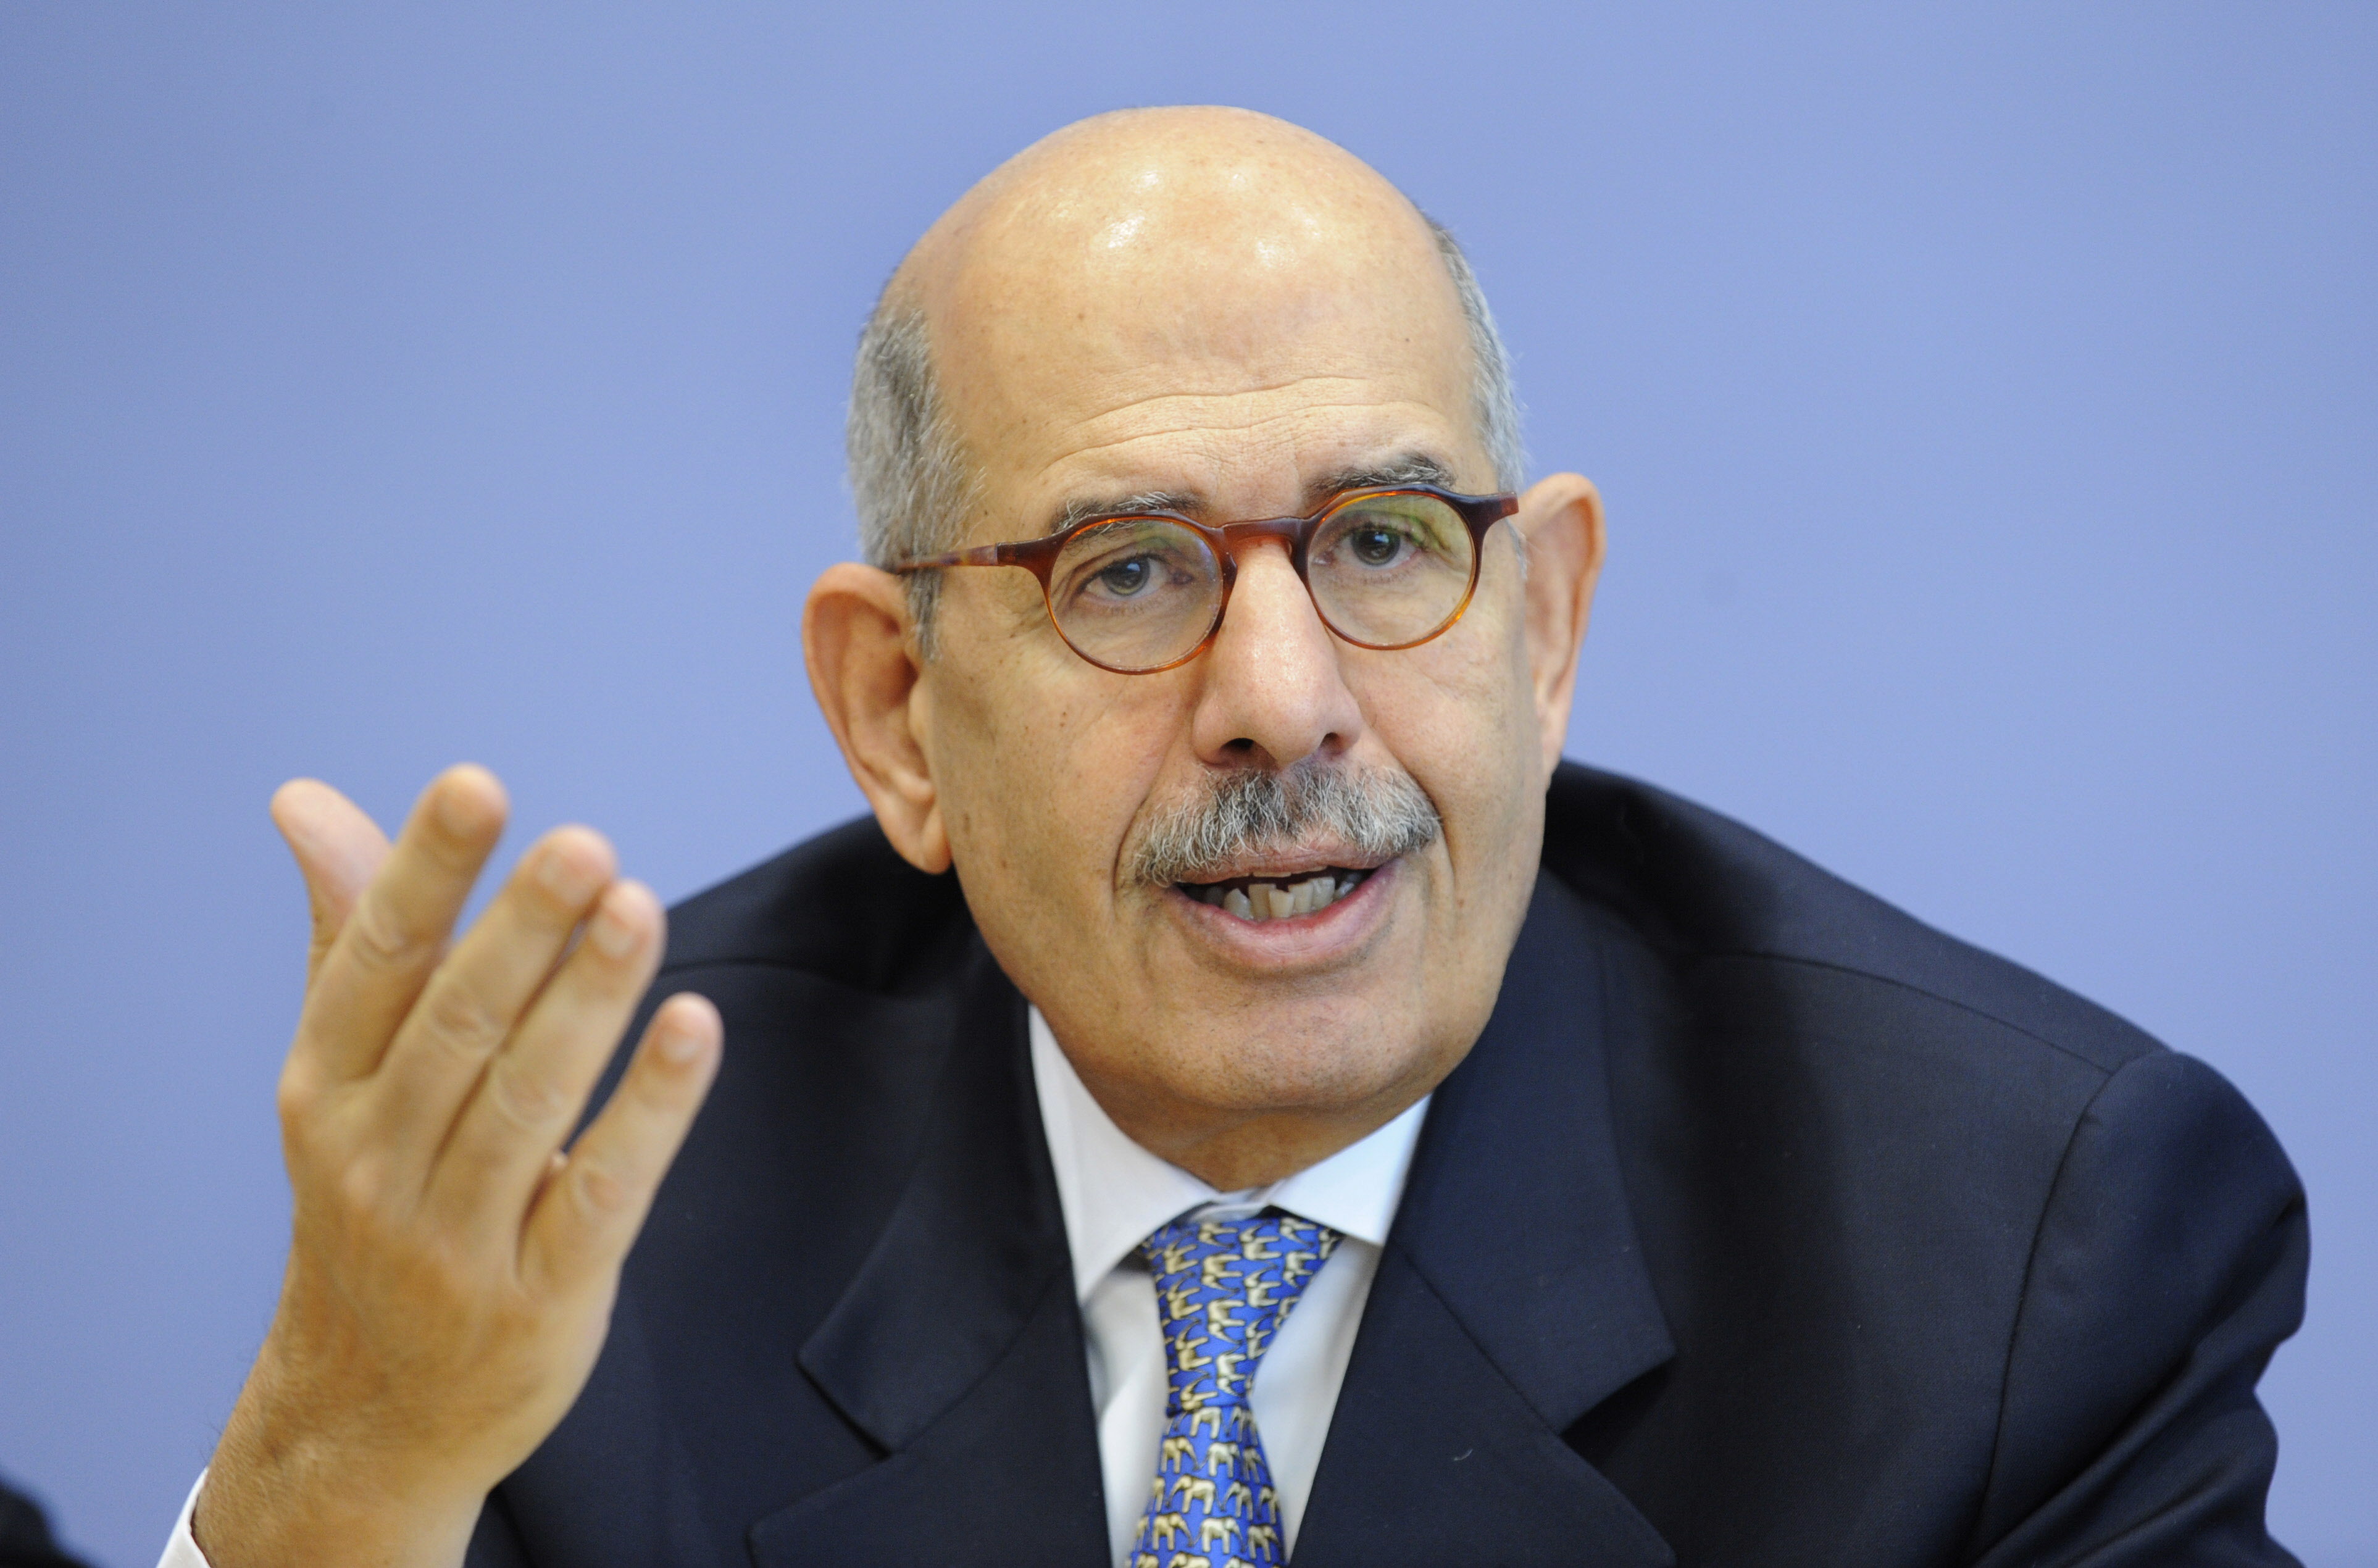 TO GO WITH AFP STORY BY Simon Morgan(FILES) Mohamed ElBaradei, chief of the International Atomic Energy Agency (IAEA), addresses a press conference in Berlin on November 20, 2009. UN atomic watchdog chief Mohamed ElBaradei, who once described himself as a "nuclear pope", quoted the prayer of St. Francis of Assisi in his farewell remarks on November 27, 2009 at the International Atomic Energy Agency. AFP PHOTO / JOHN MACDOUGALL